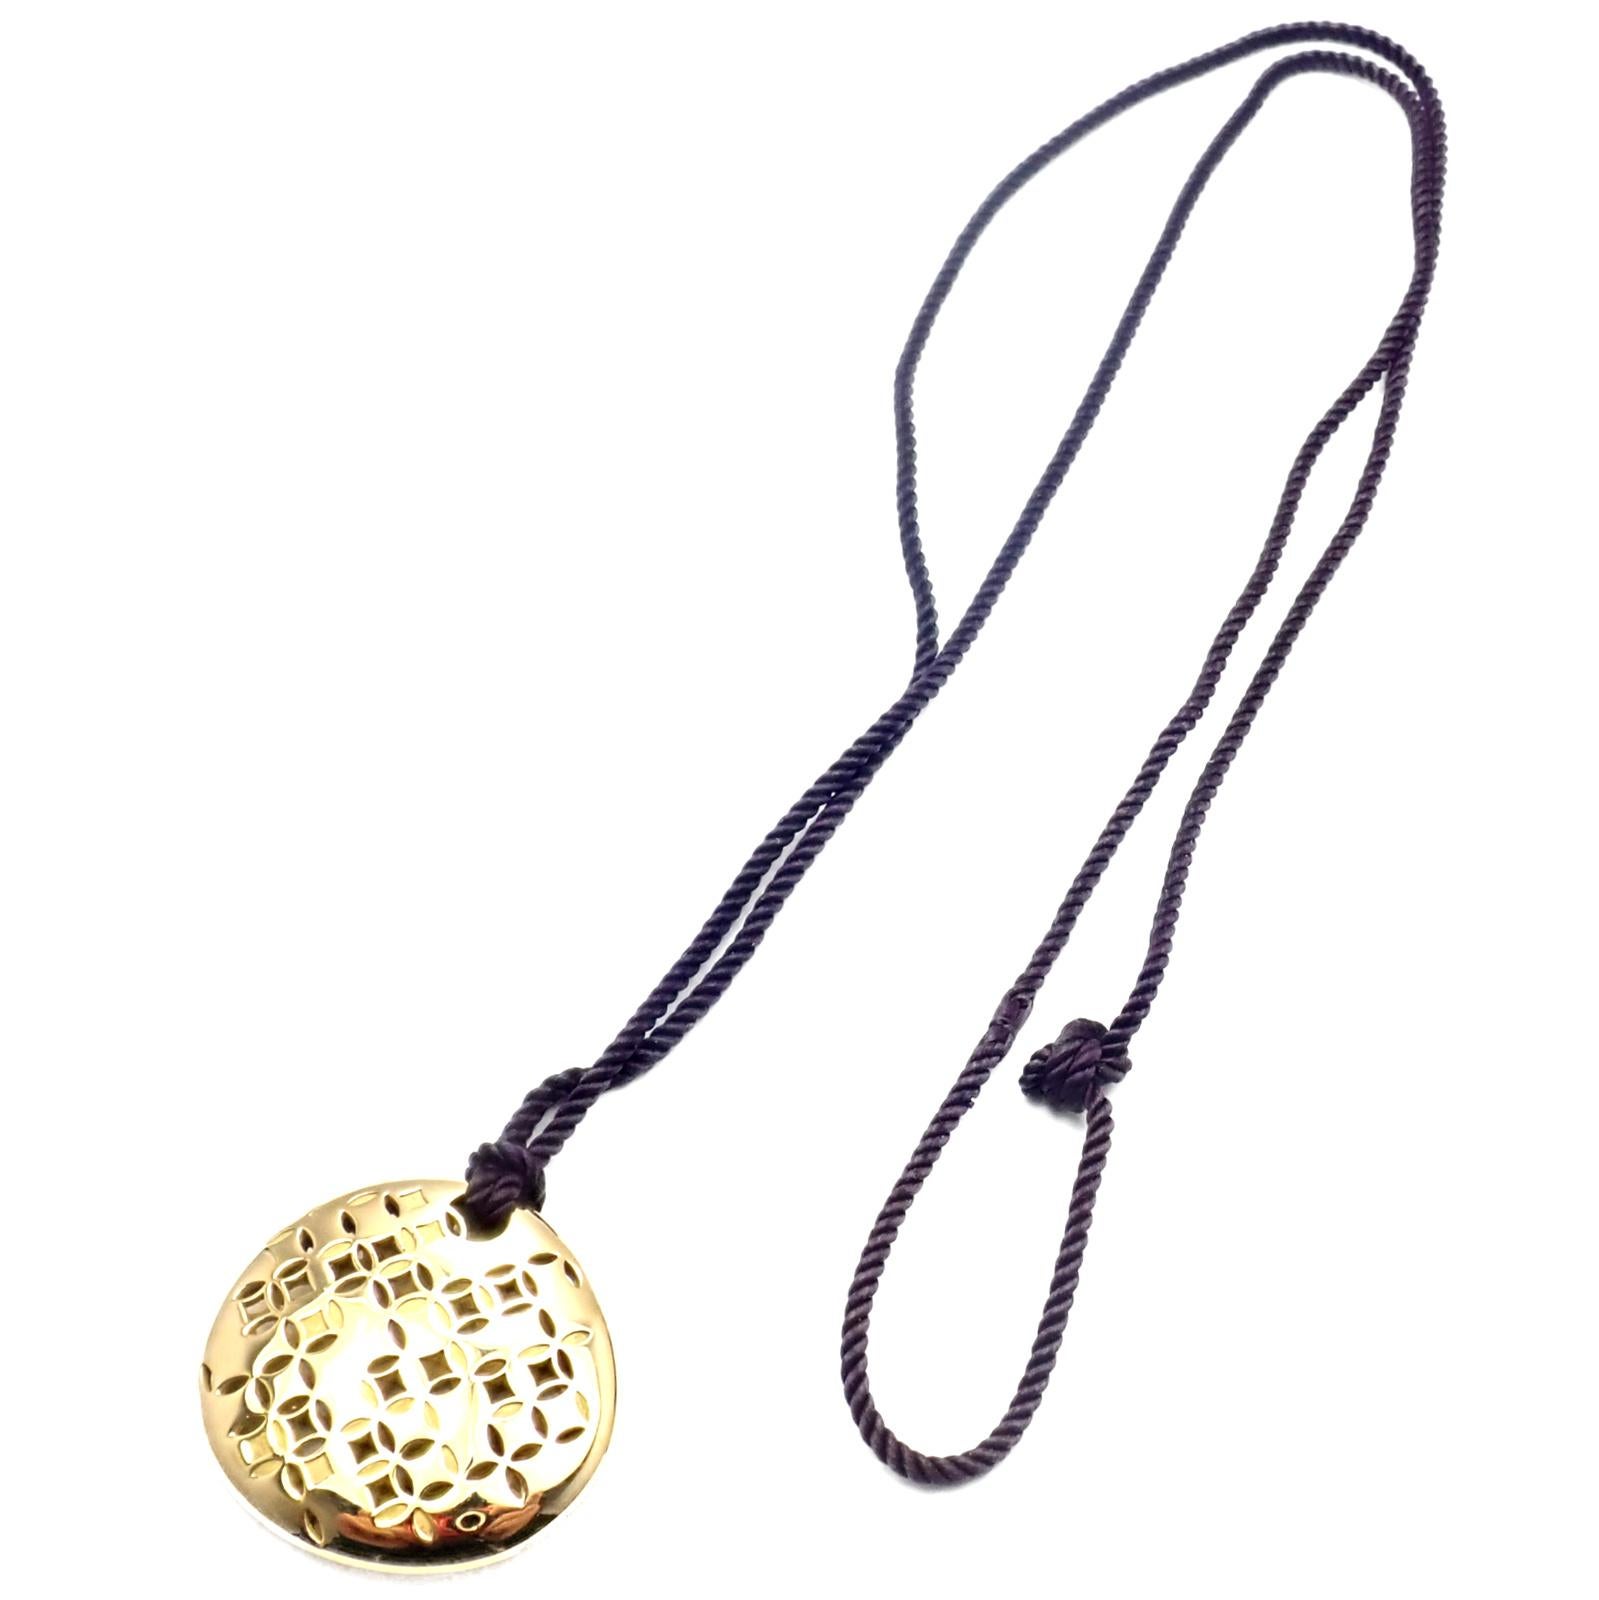 18k Yellow Gold Large Pendant Necklace by Louis Vuitton. 
Details: 
Length: Silk Cord Adjustable up to 32